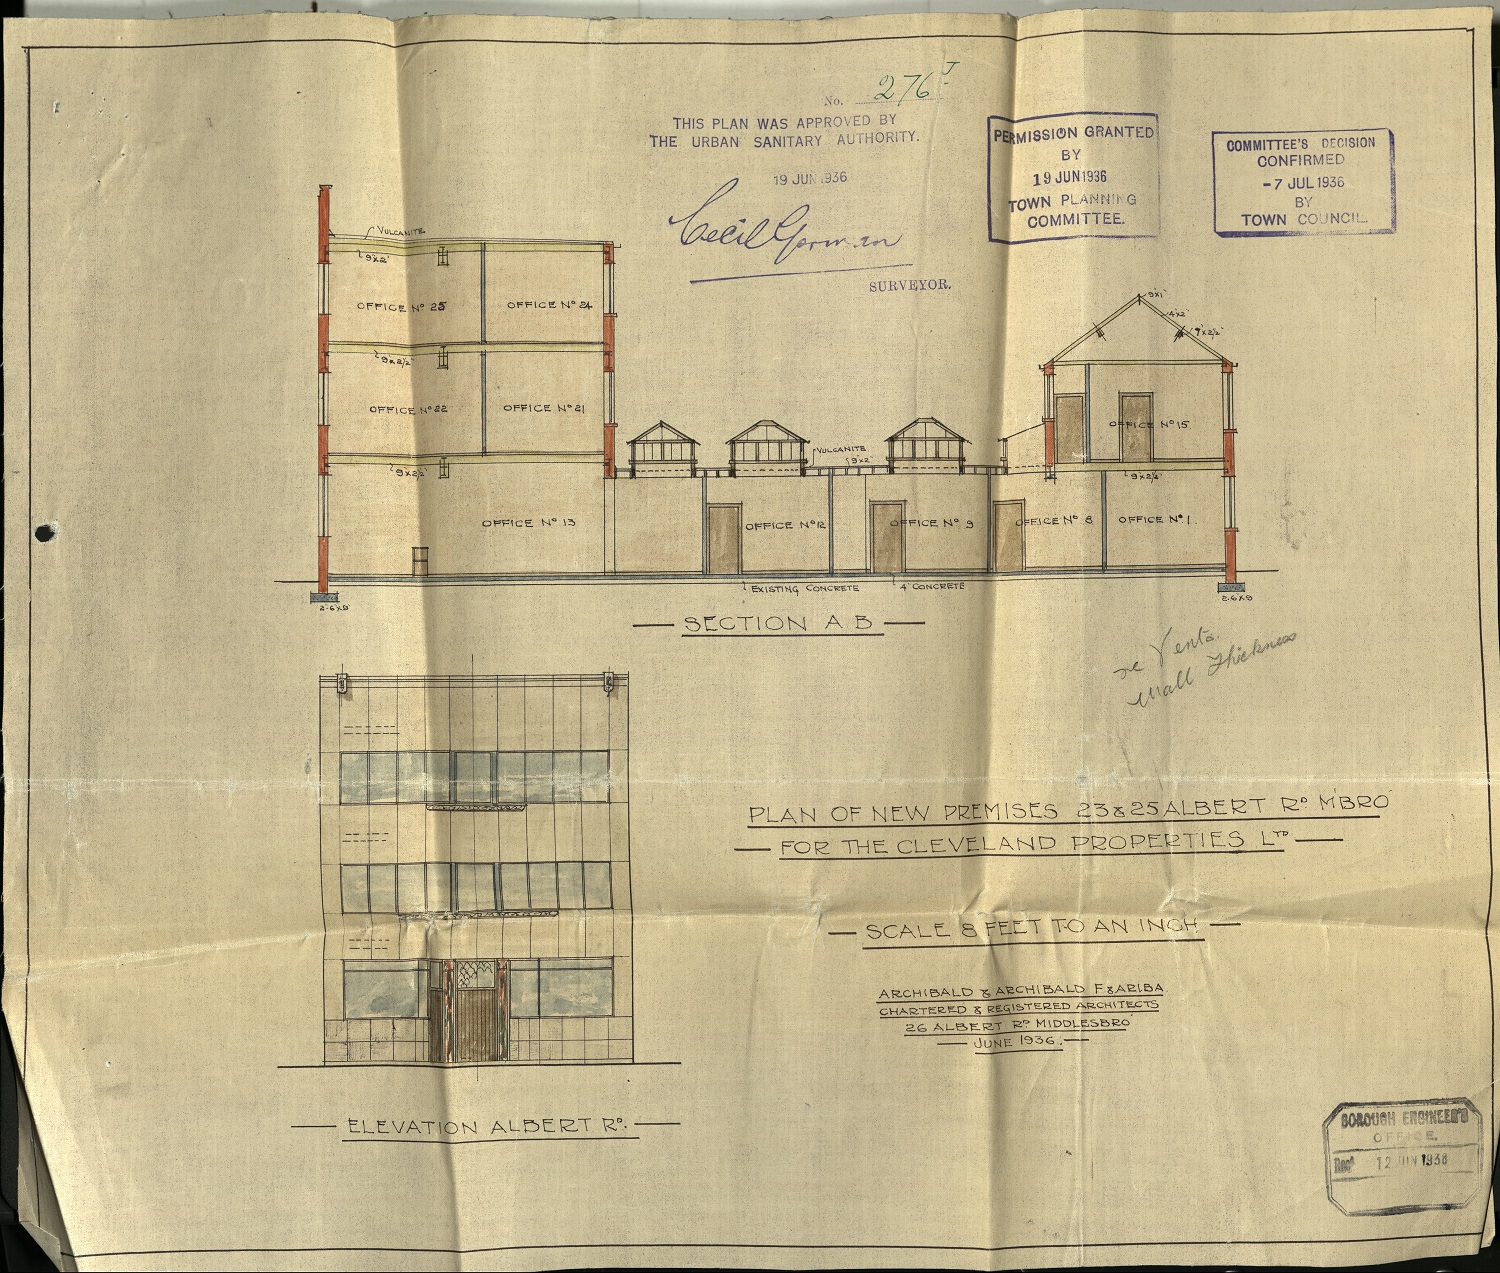 Kitching Building plans from the 1930s (Teesside Archives).jpg